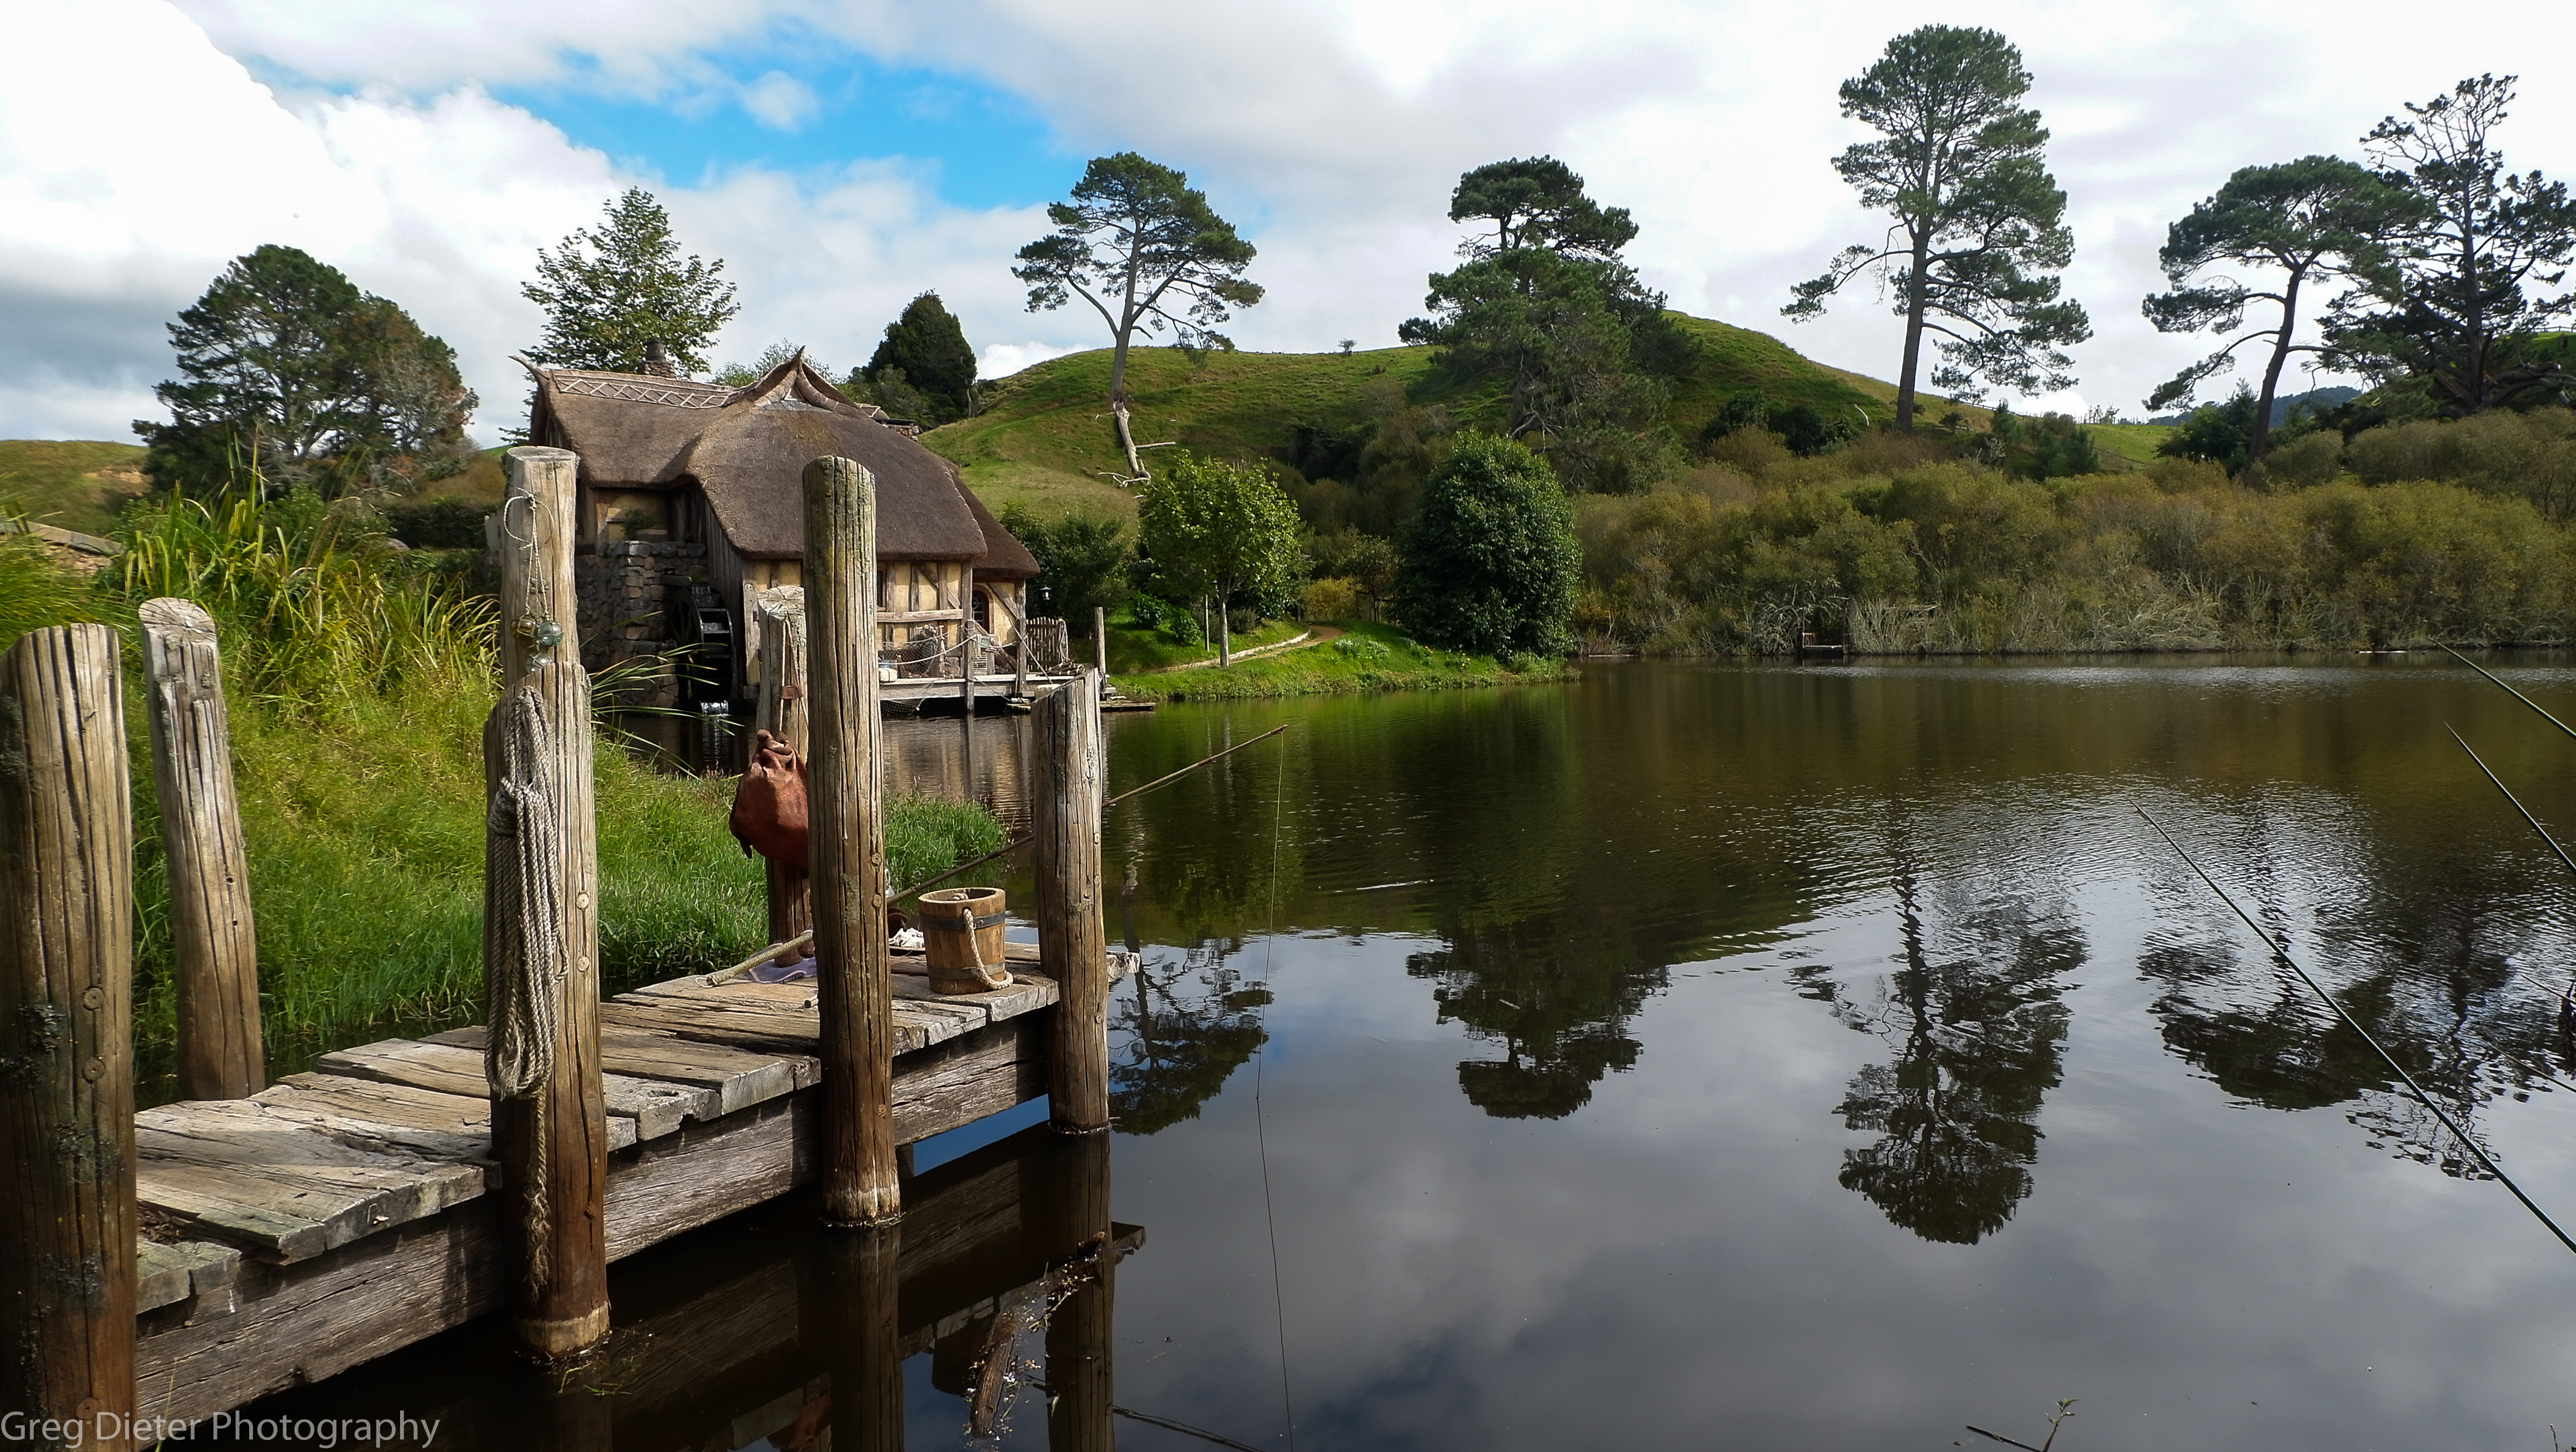 General 4694x2646 nature landscape New Zealand Hobbiton The Lord of the Rings lake pier fishing calm green